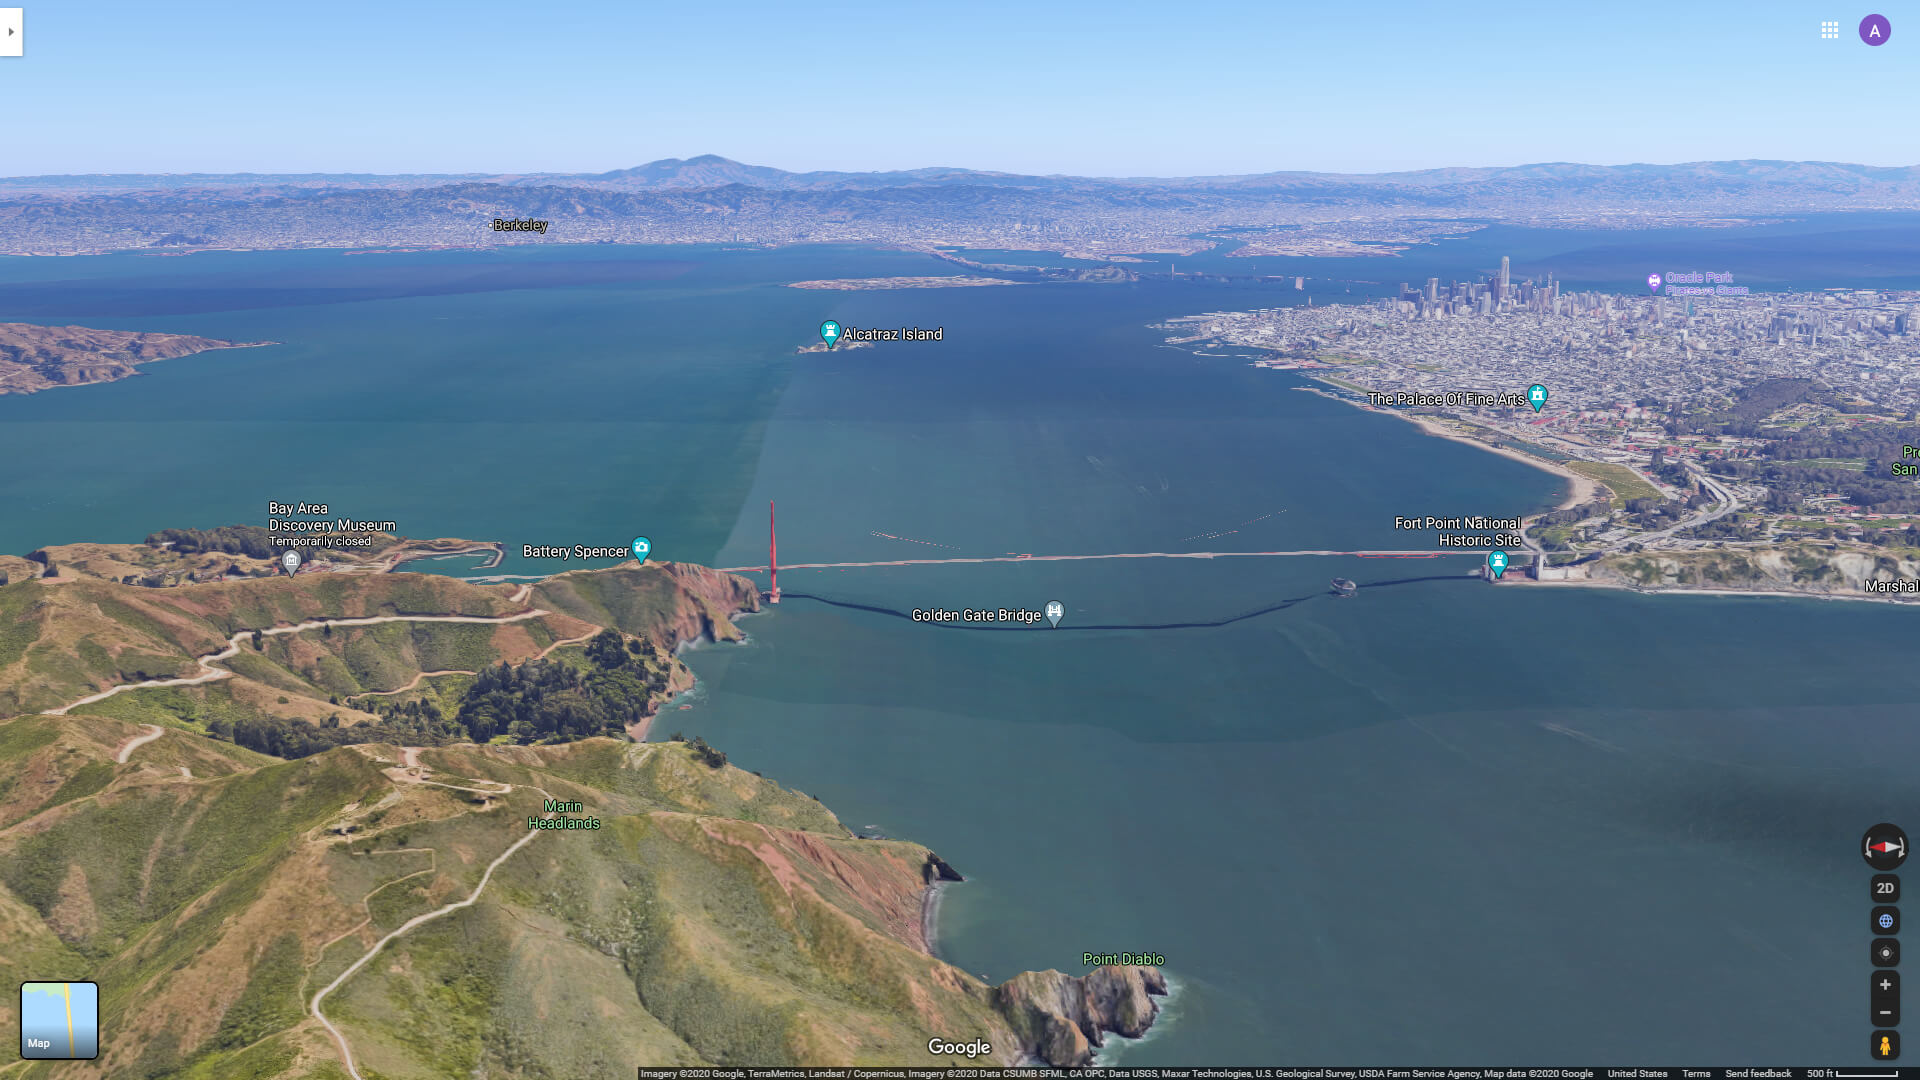 San Francisco and Golden Gate from Marin Headlands